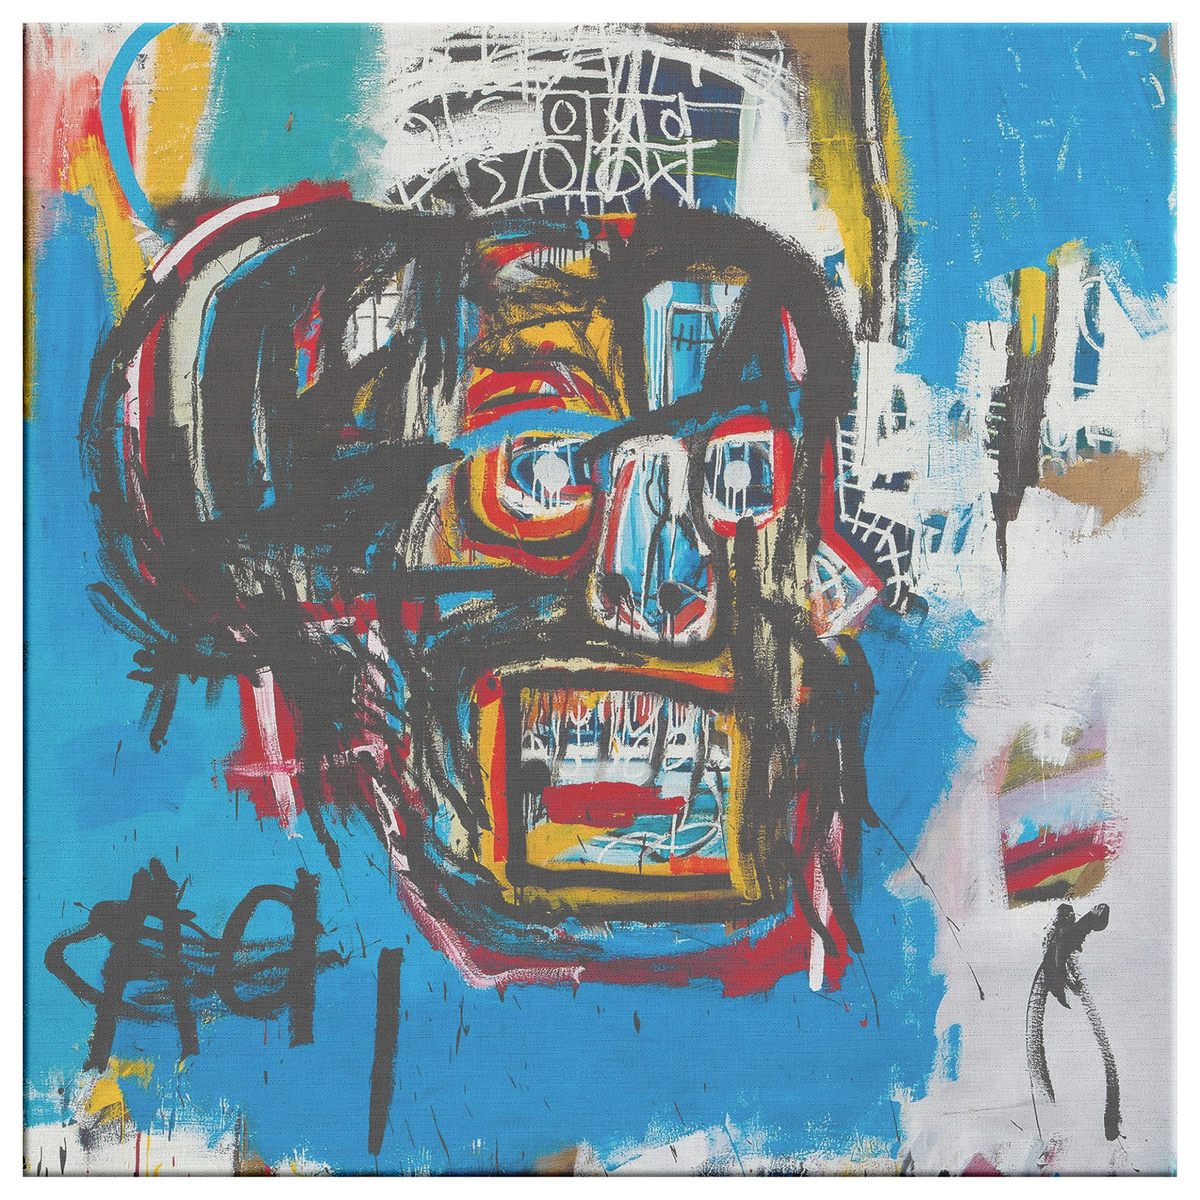 "Untitled" Canvas Print by Basquiat